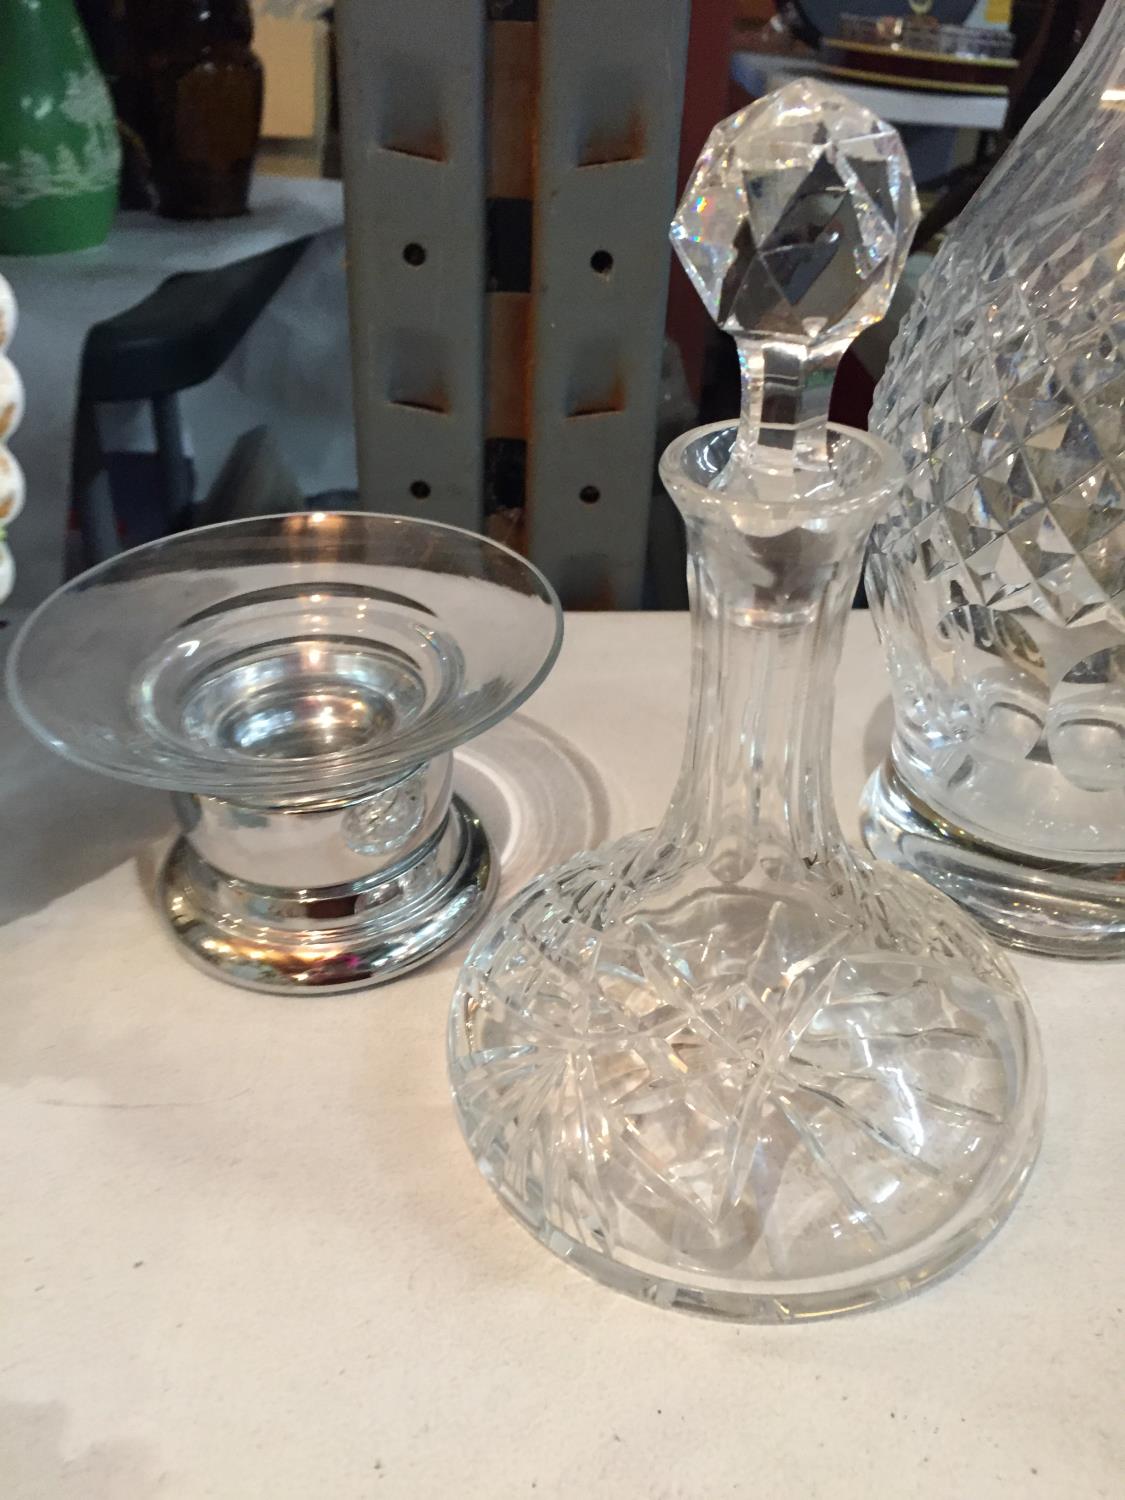 THREE ITEMS OF GLASSWARE TO INCLUDE A DECANTER, MINATURE DECANTER AND A DISH ON A CHROME BASE - Bild 3 aus 3